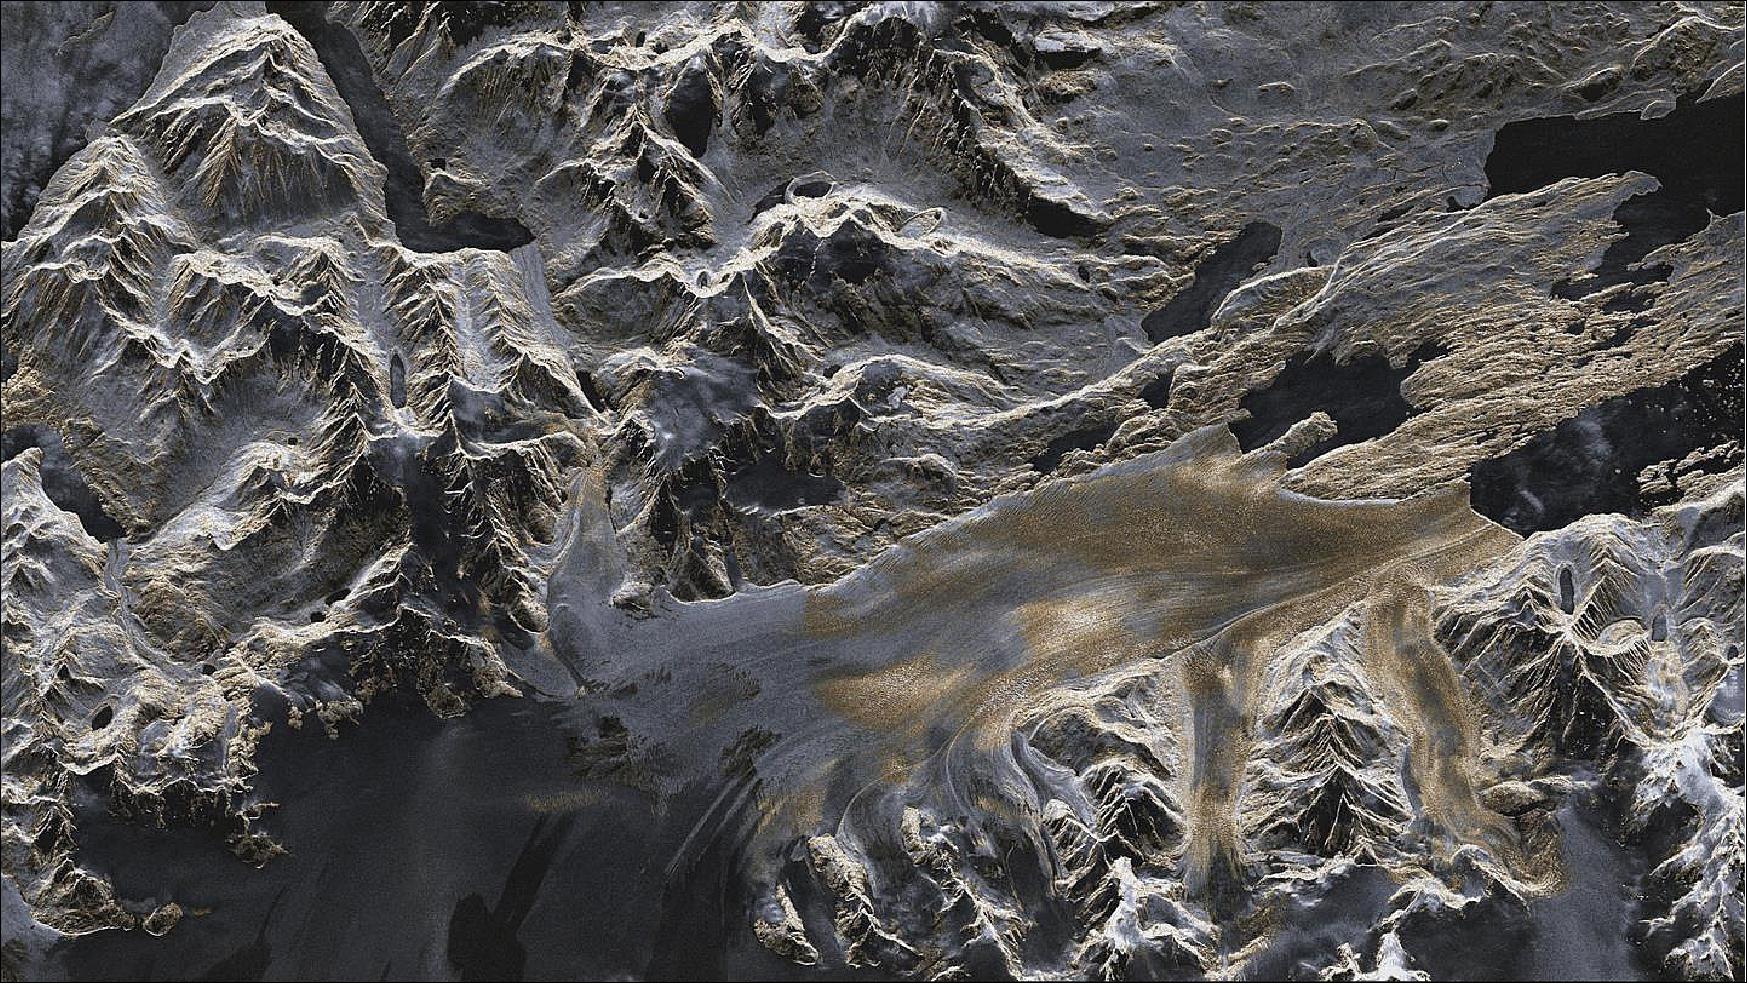 Figure 26: TerraSAR-X image of the Upsala Glacier in Patagonia, Argentina. Artificially colored TerraSAR-X image (strip mode) of the Upsala Glacier, created using data acquired on 7 January 2008. The colors provide information about the roughness of the terrain. Areas that appear predominantly smooth to the radar are tinted in darker shades of blue and gray. Areas with a coarser surface texture are shown in yellow [image credit: DLR (CC-BY 3.0)]